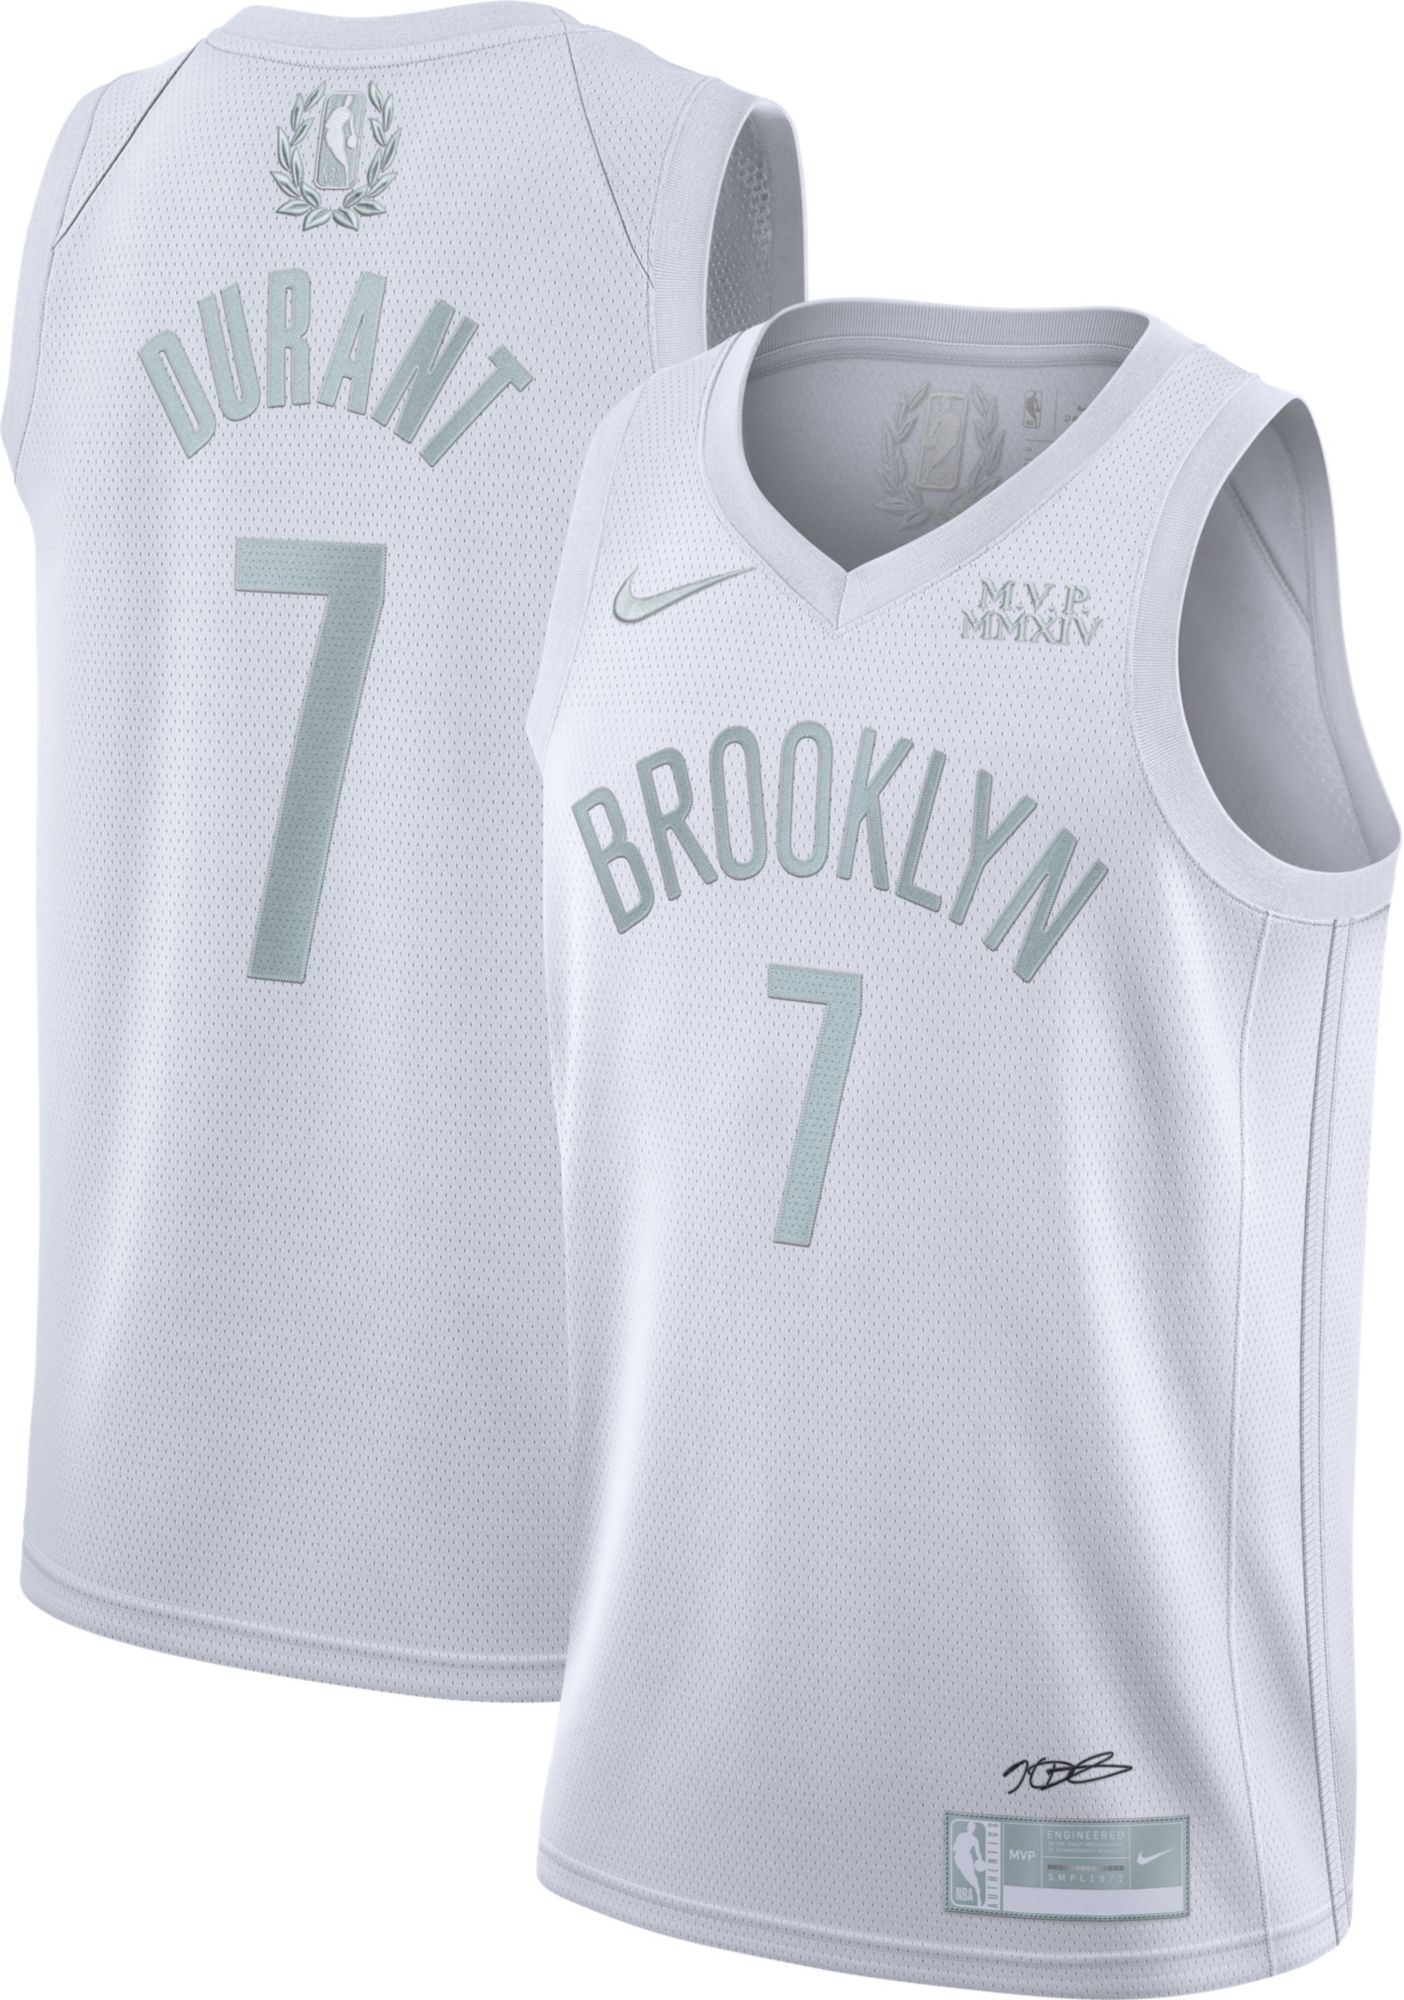 durant white jersey